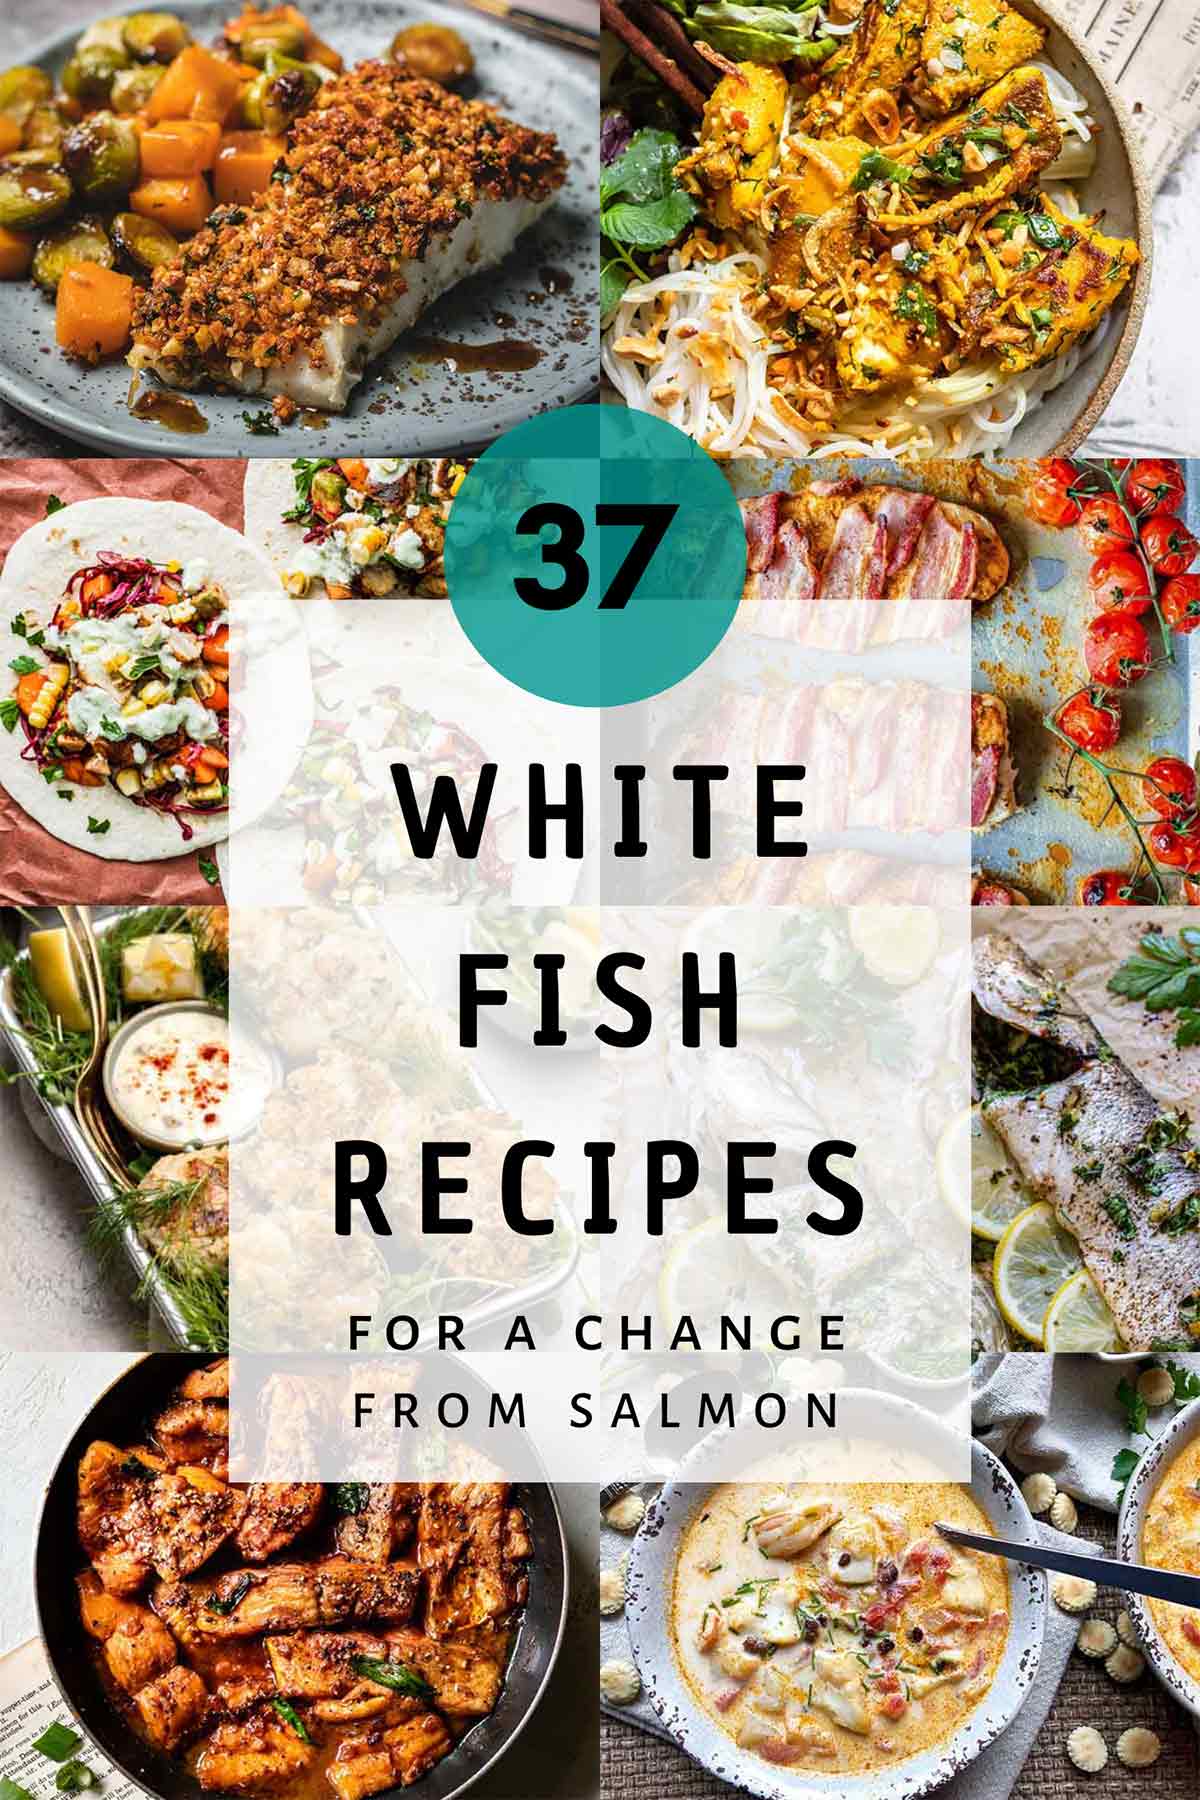 White fish recipes featured image